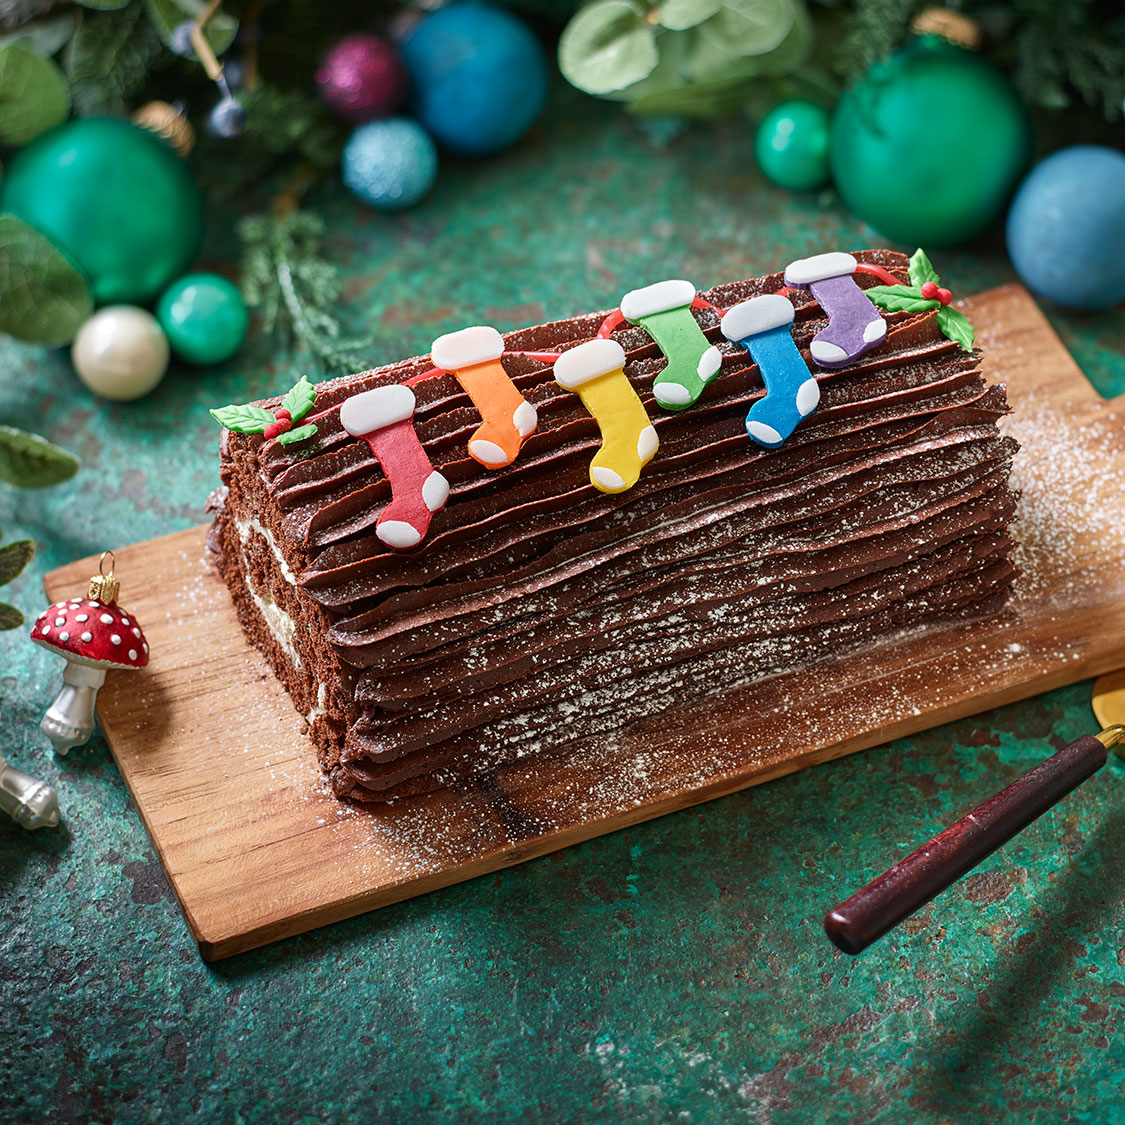 Prue Leith's Chocolate Yule Log The Great British Bake Off The